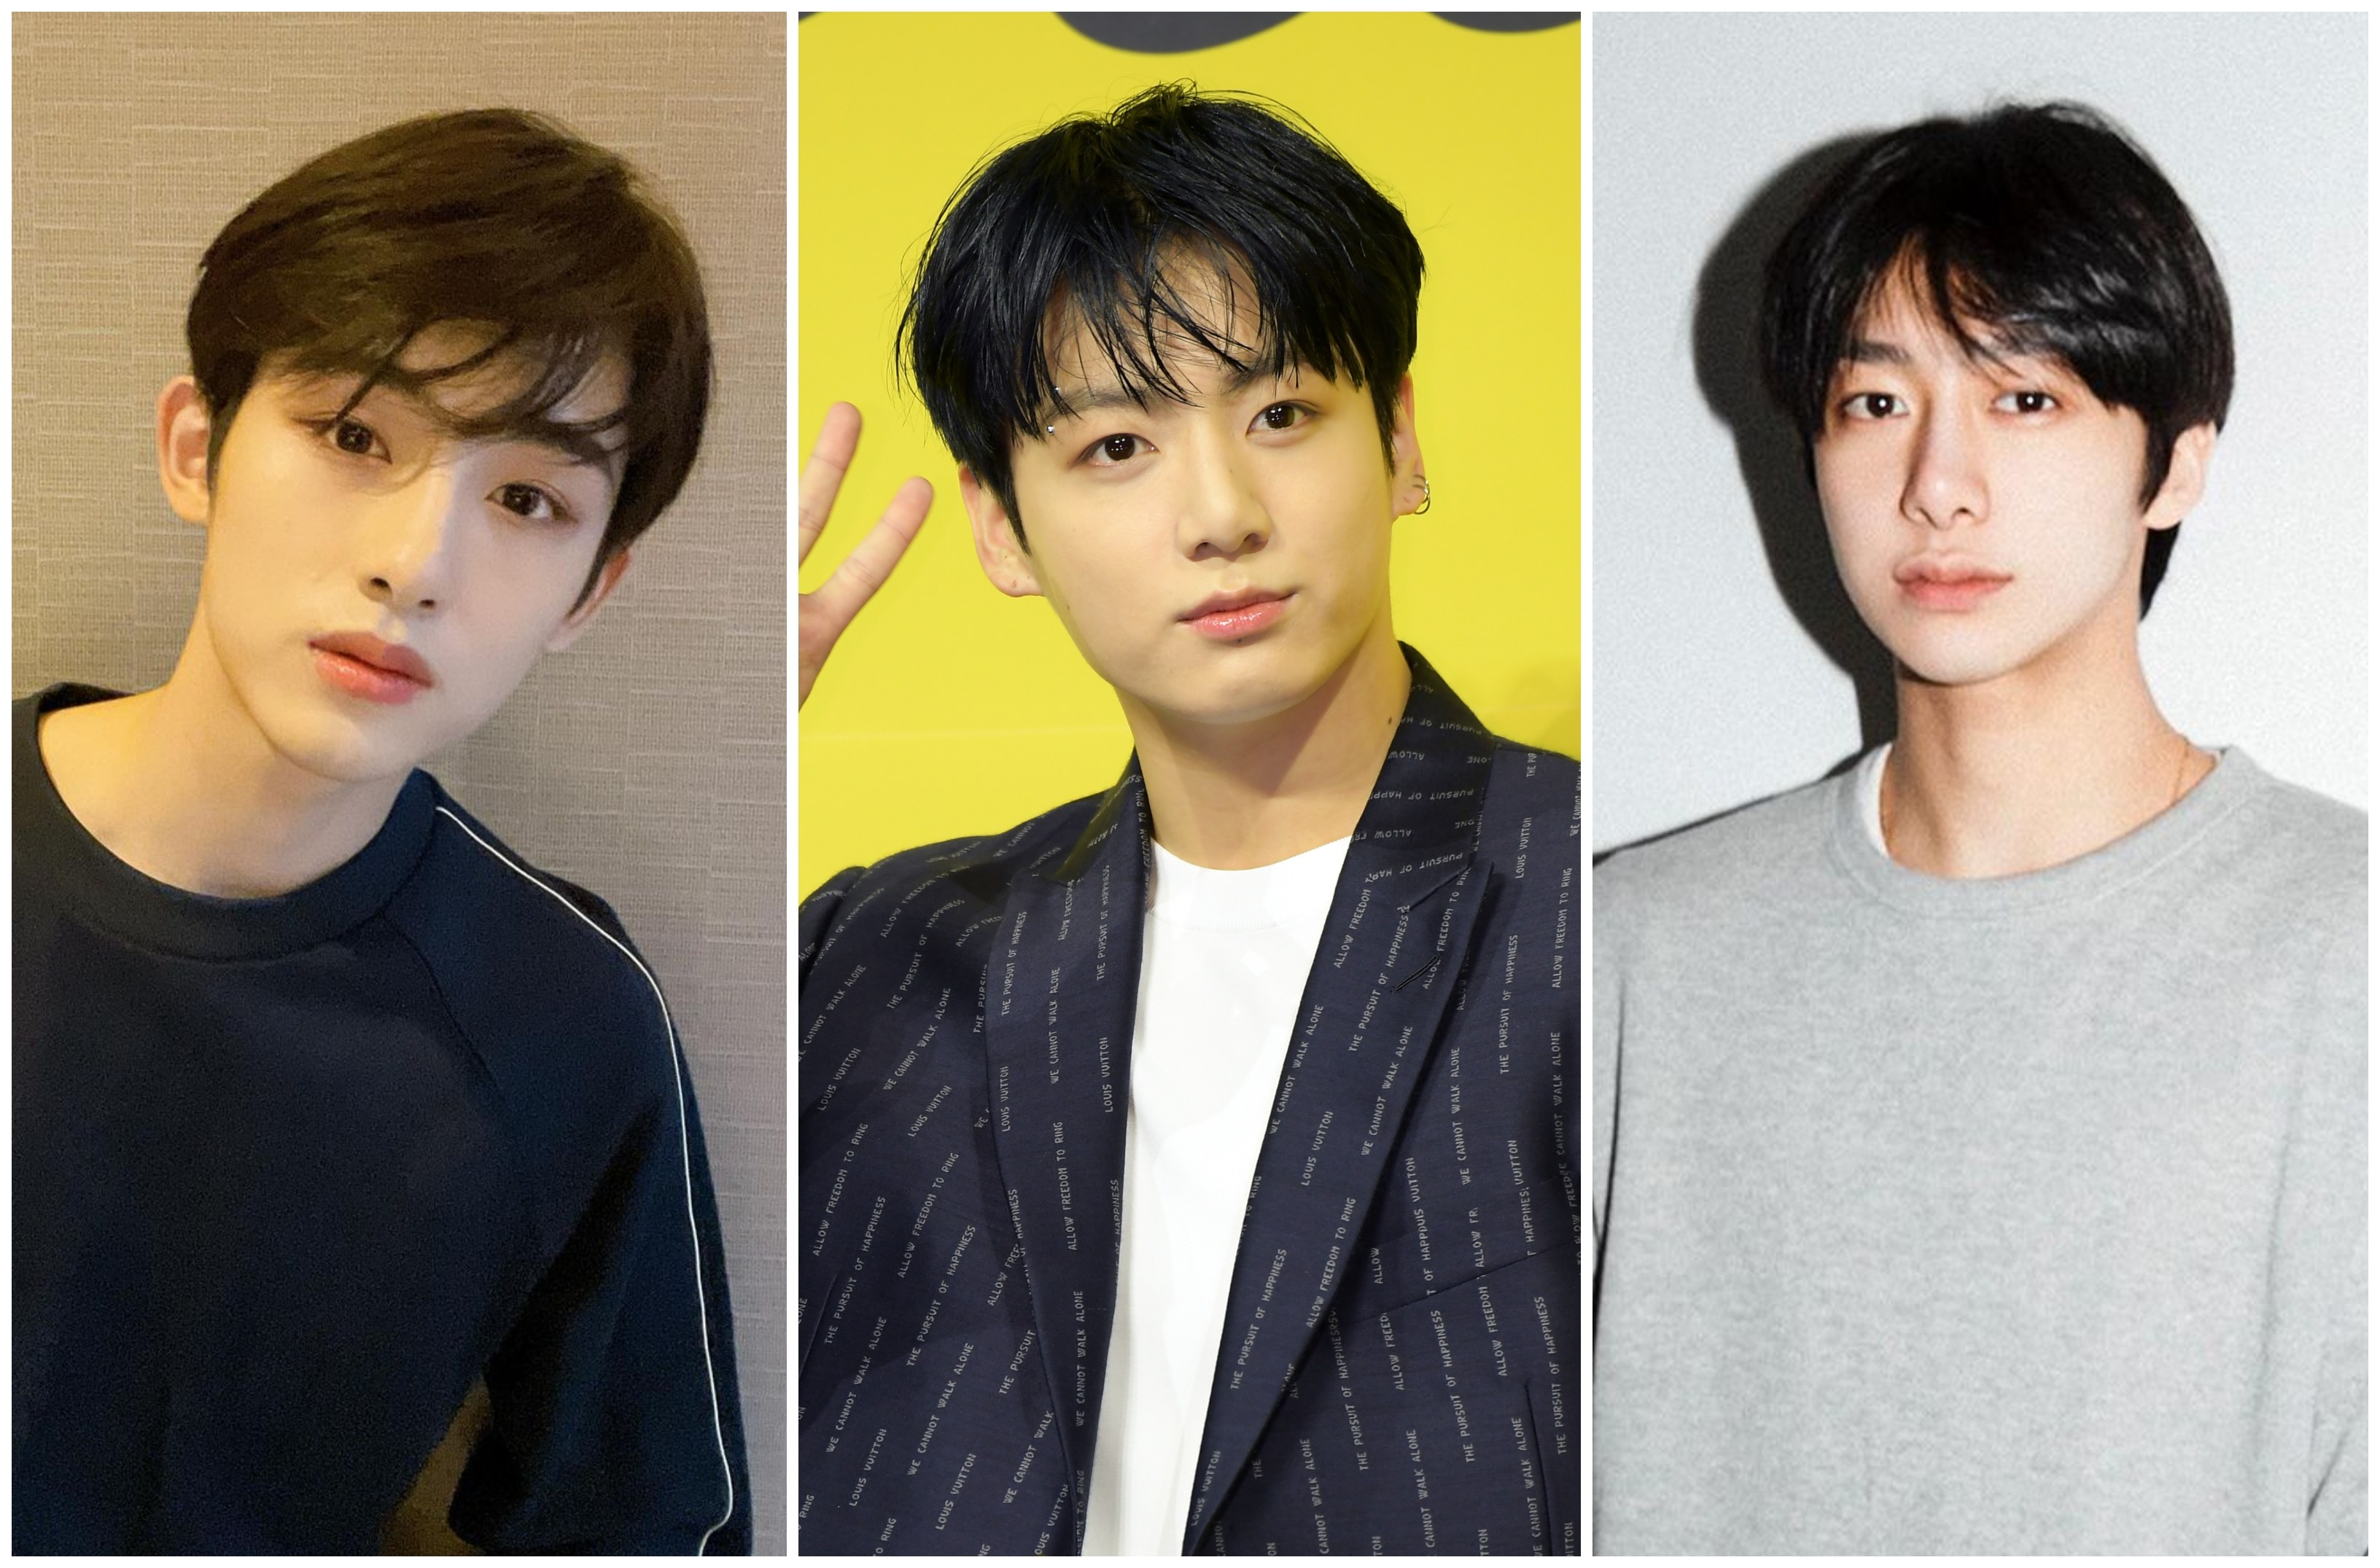 5 K-pop stars who had to say sorry unnecessarily, including, from left, NCT’s Winwin, BTS’ Jungkook and Monsta X’s Hyungwon. Photos: @wwiinn_7/Instagram, Getty Images, @coenffl/Instagram